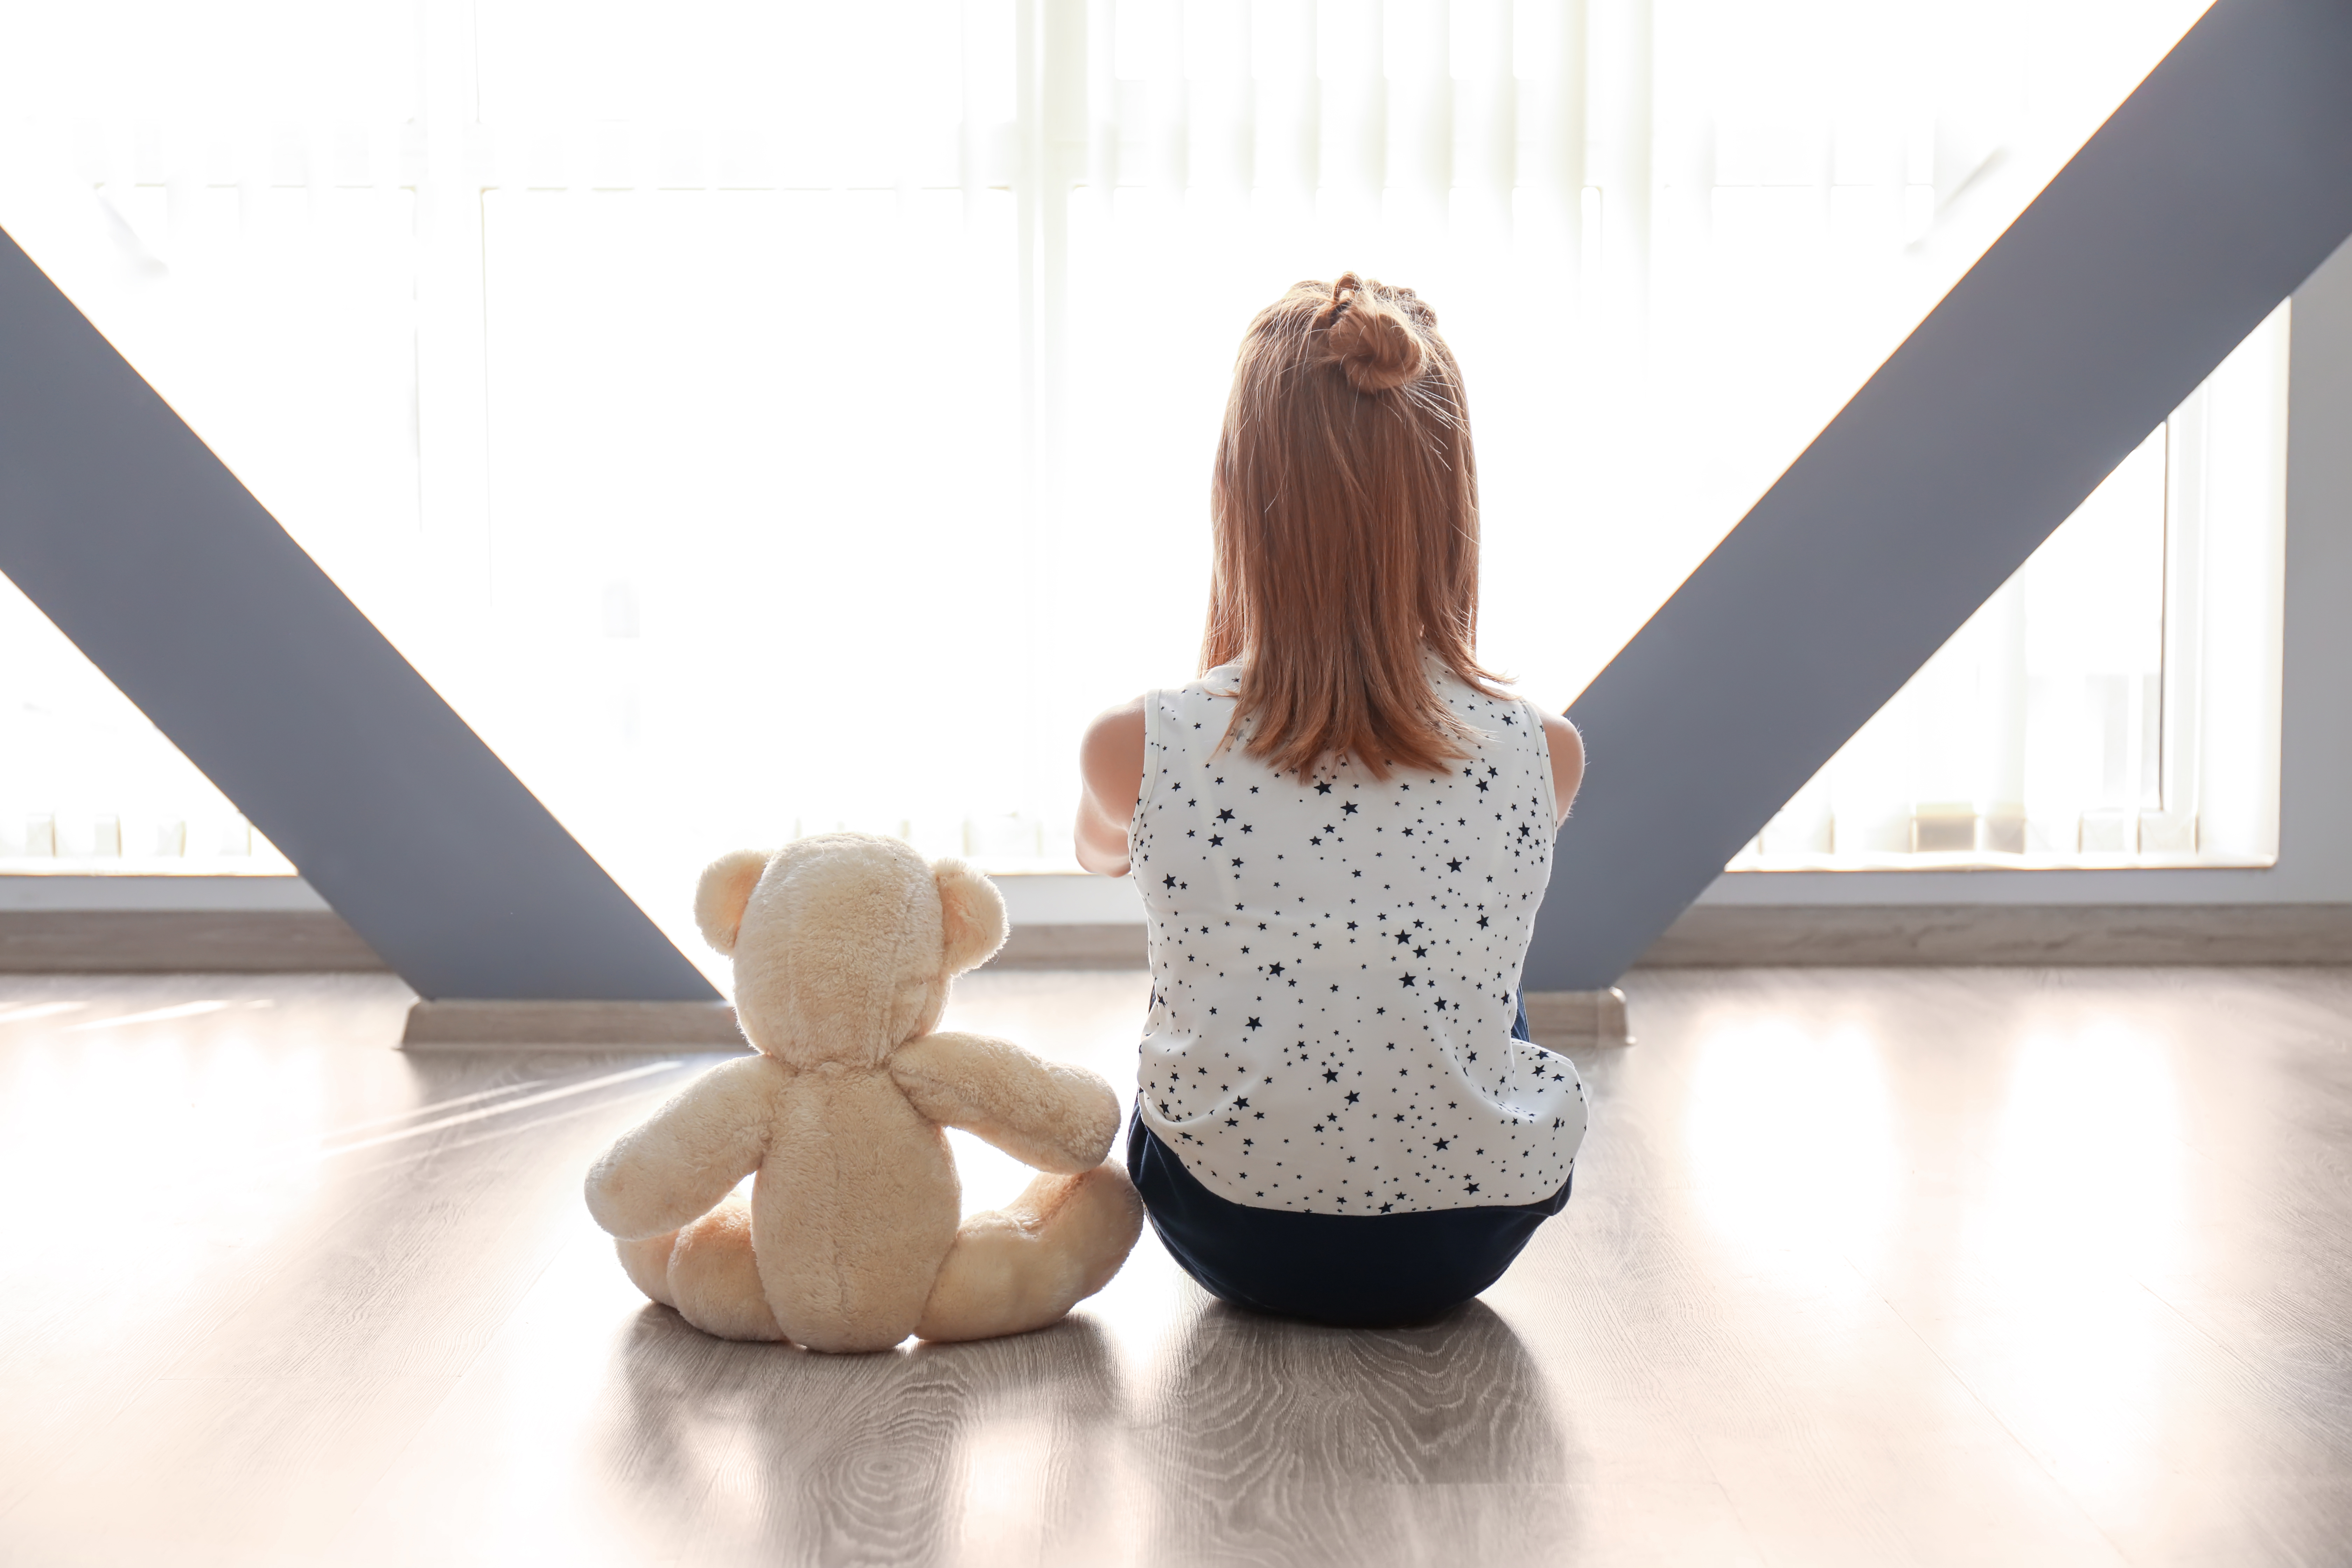 A little girl sitting on the floor with her teddy bear | Source: Shutterstock